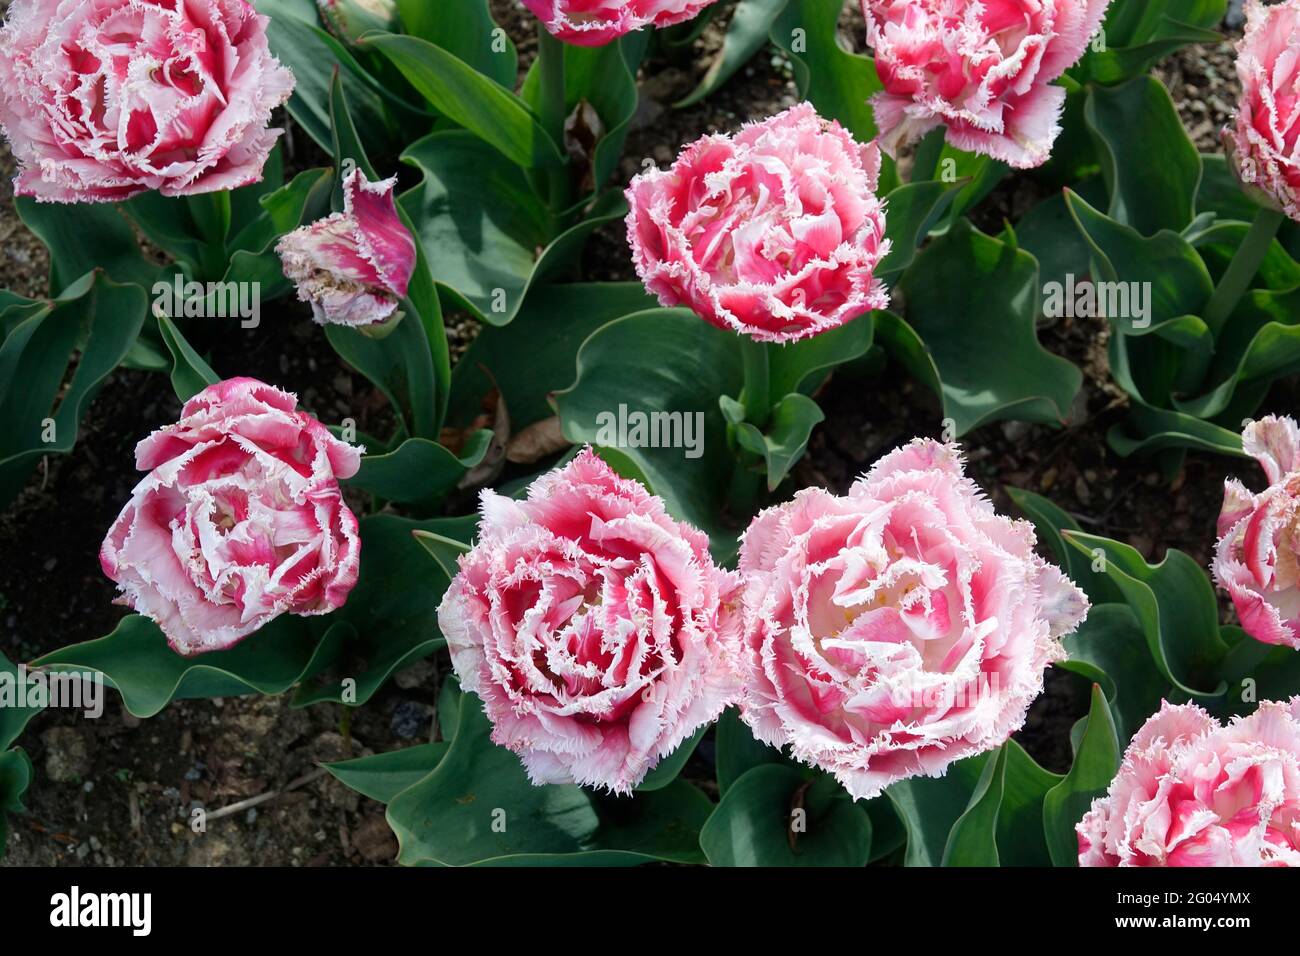 Pink Queenland Tulips with Ruffles on the Double Petals of Serrated Edges and White Tips Stock Photo